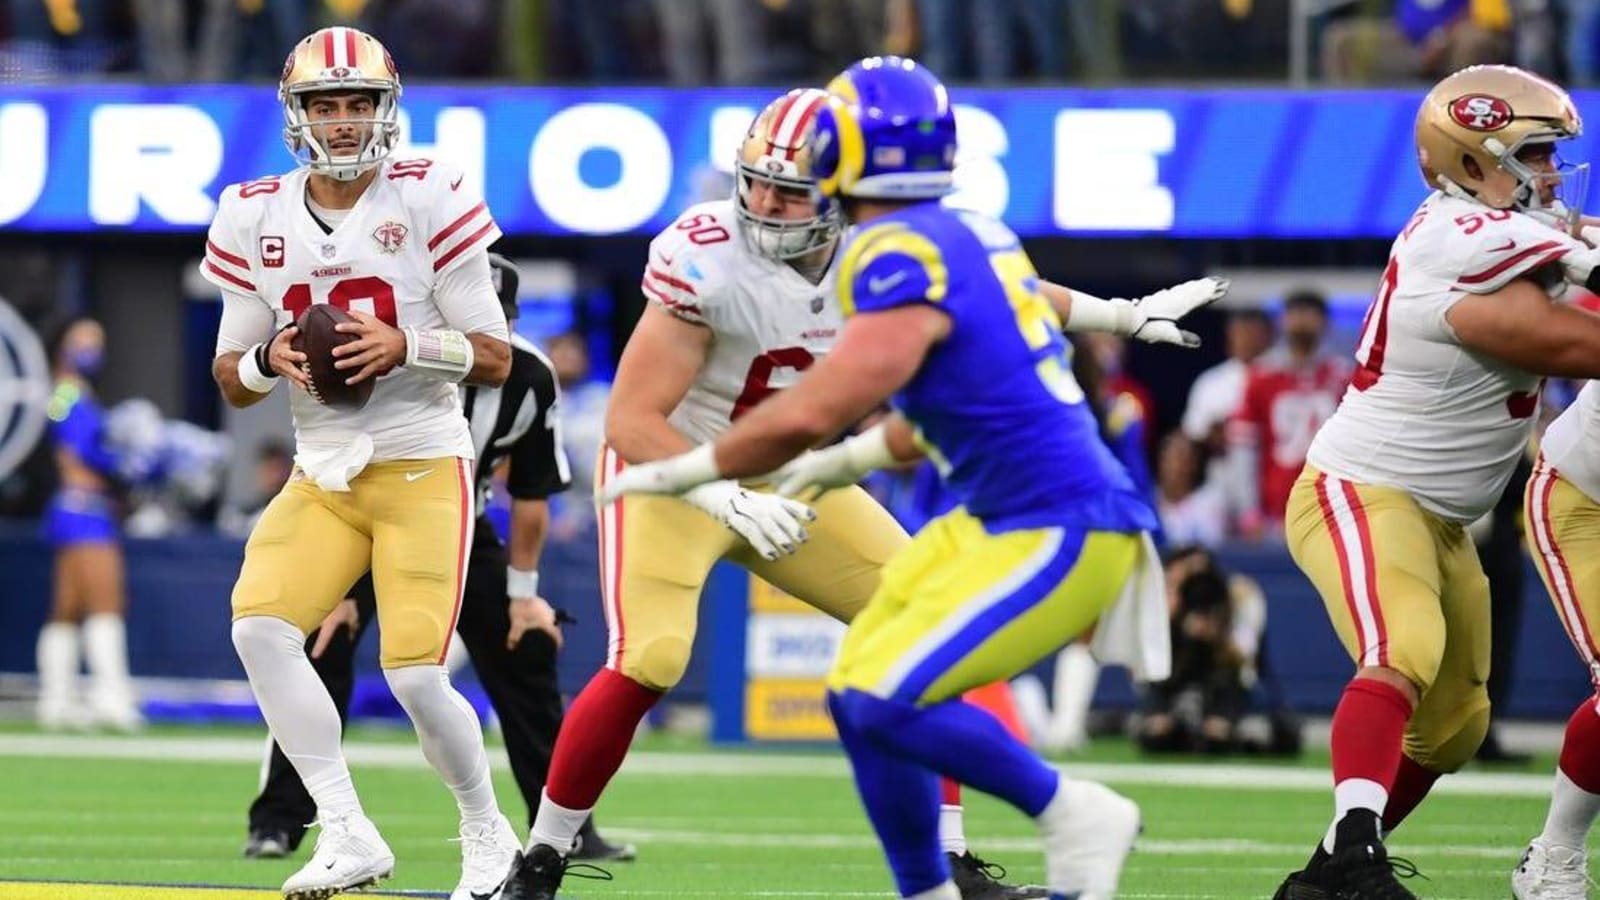 San Francisco 49ers vs. Los Angeles Rams Prediction and Preview